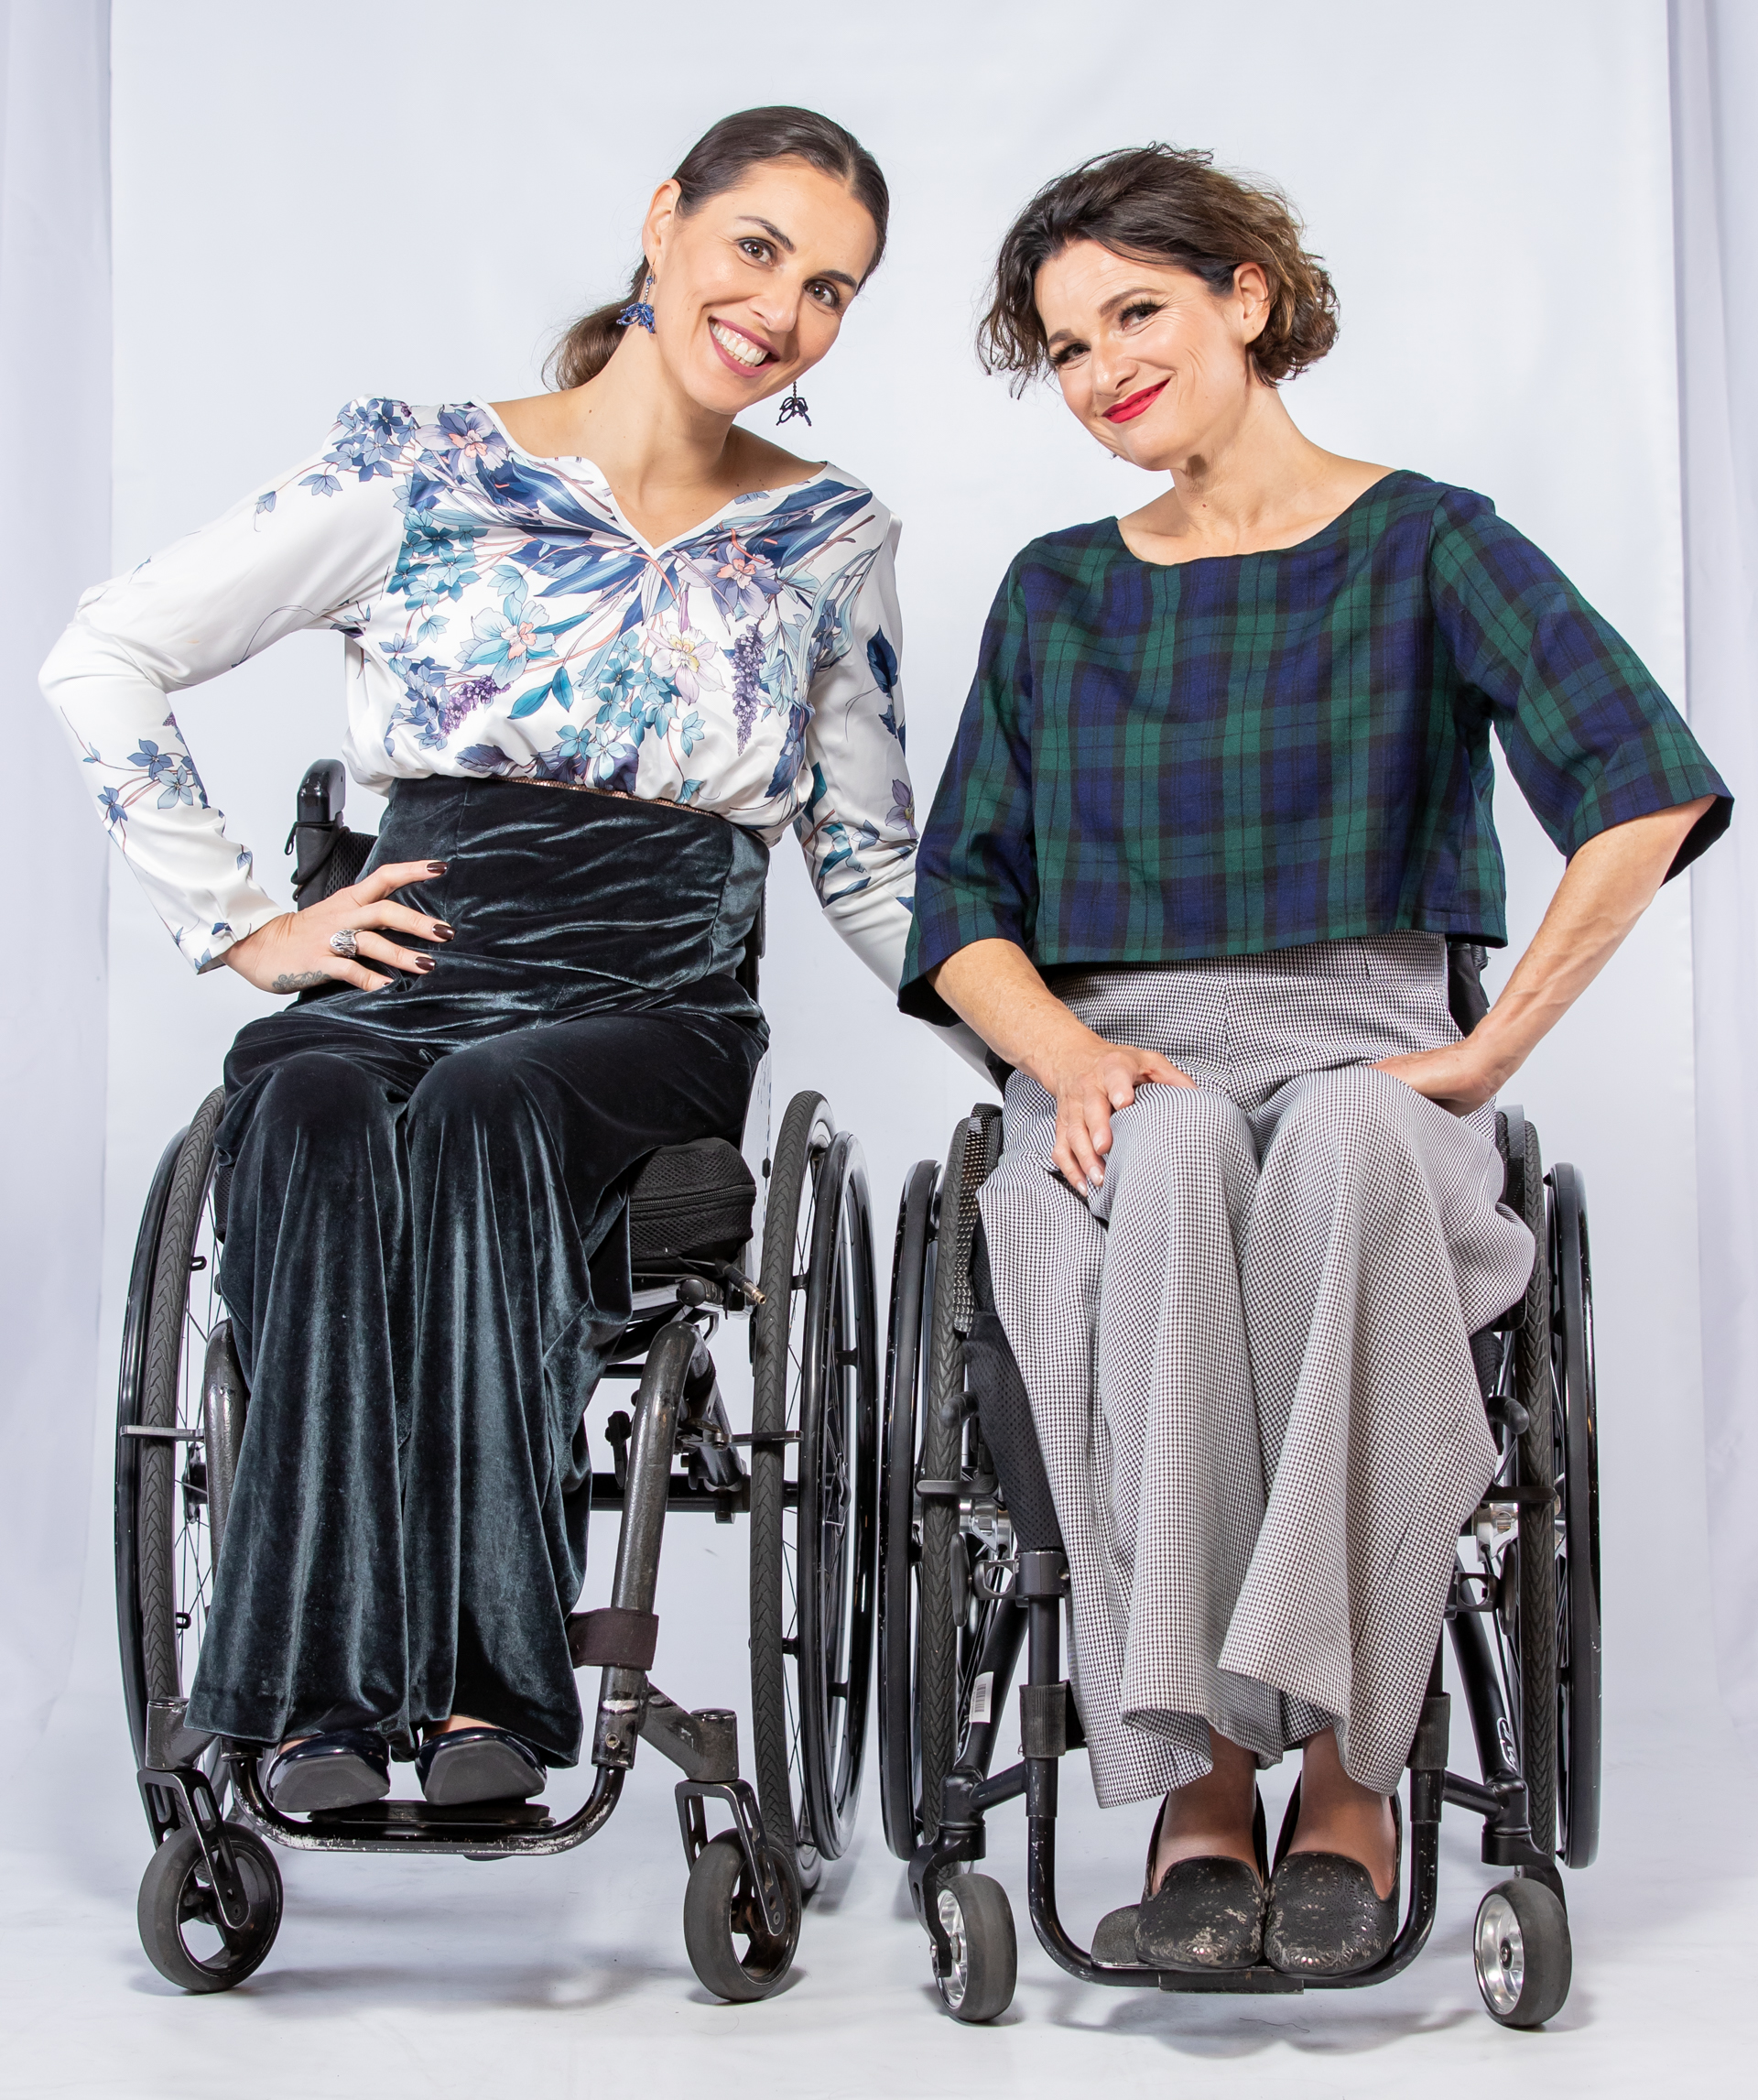 The economic power of disabled people in fashion